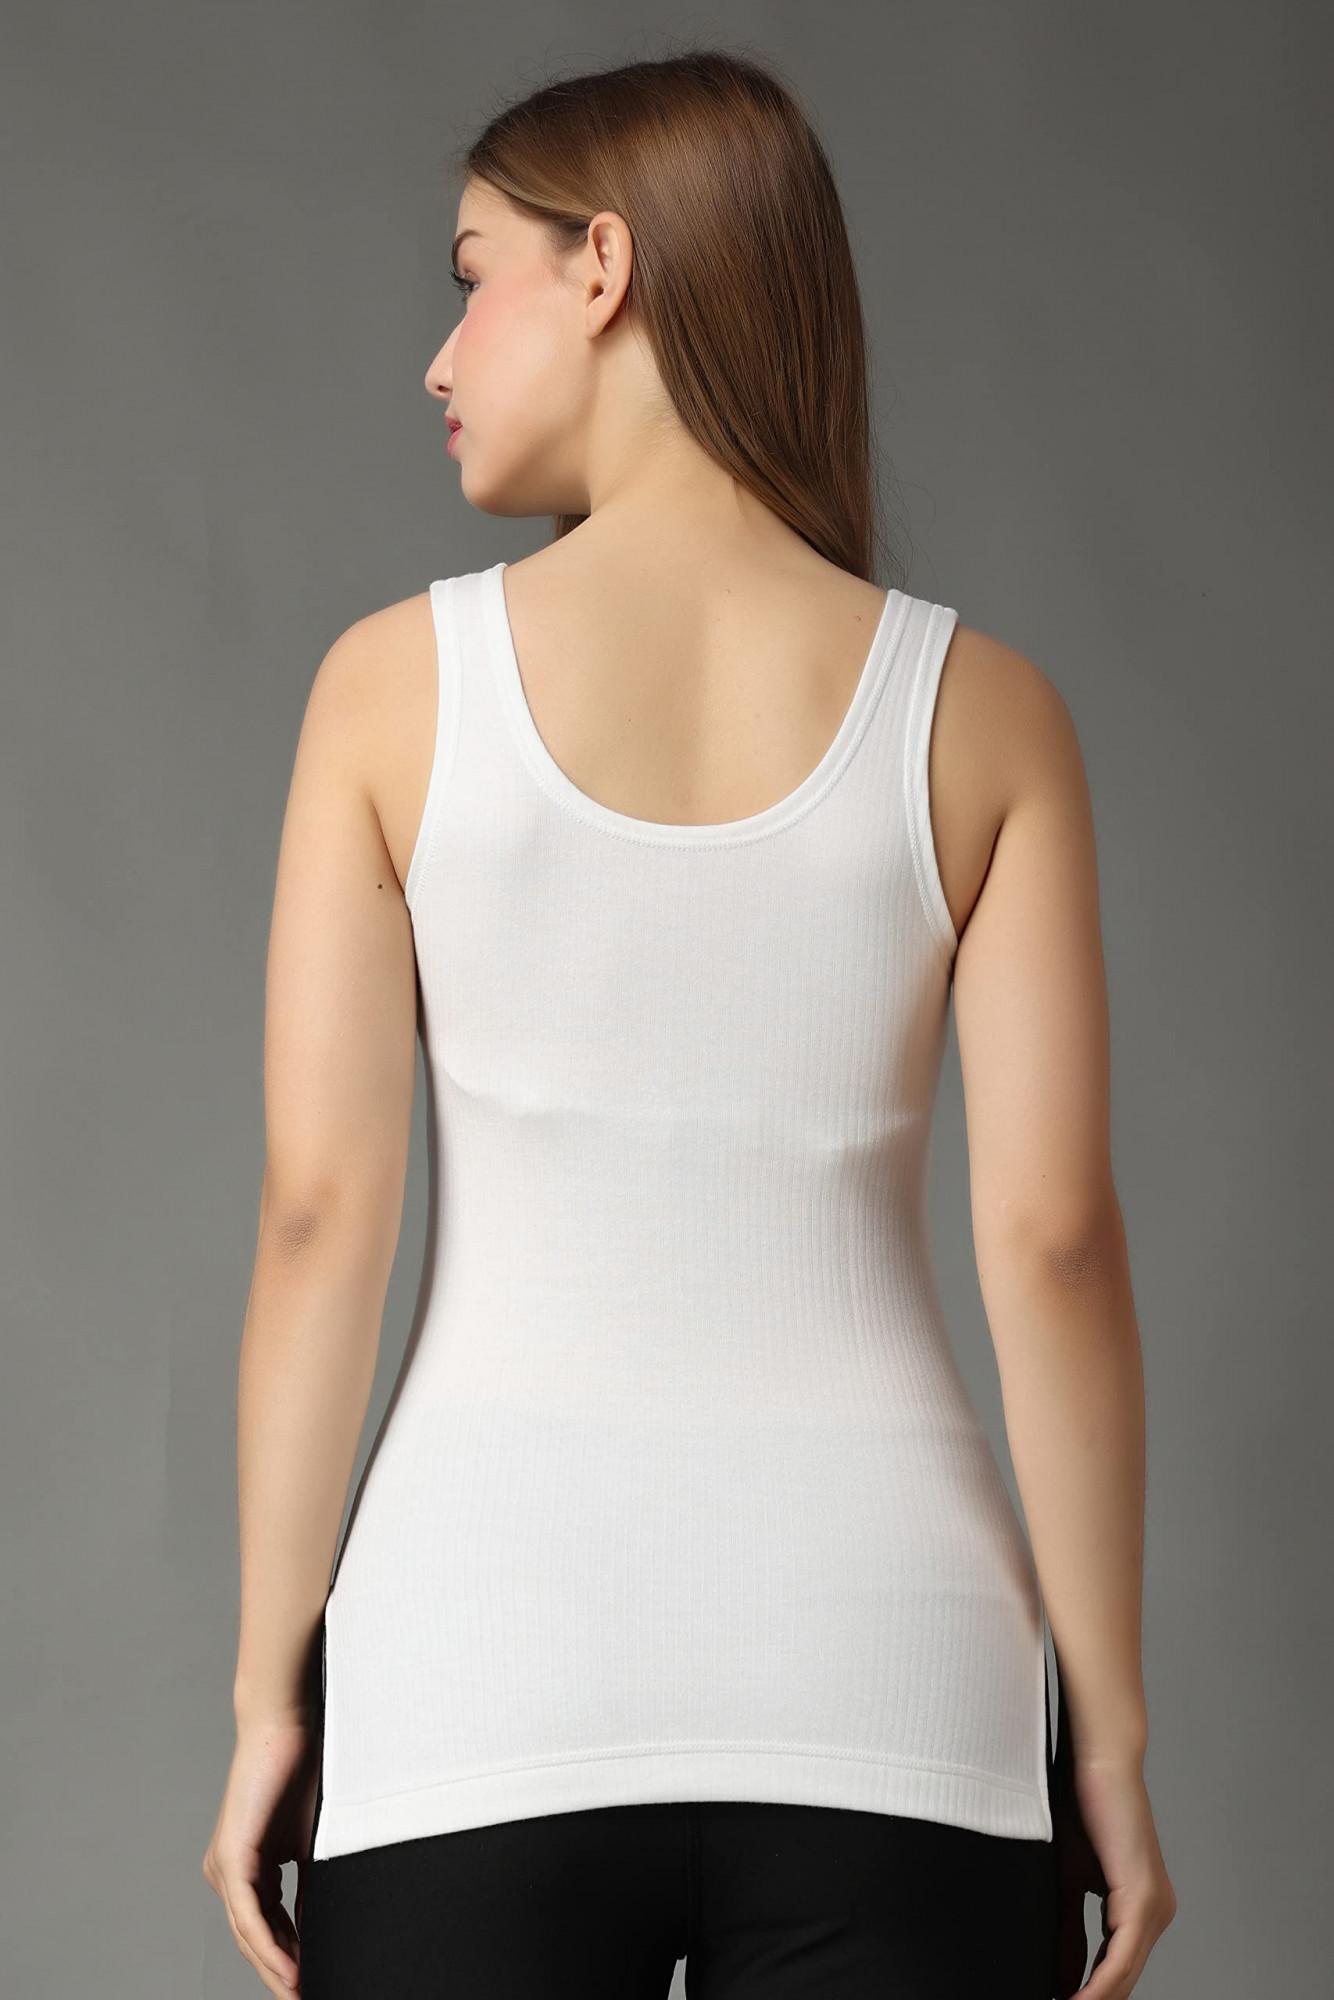 https://www.fastemi.com/uploads/fastemicom/products/wearslim-premium-cotton-quilted-thermal-scoop-neck-camisole-ultra-soft-sleeveless-underwear-tank-top-for-women---white-2xlsize-2xl-267982229188056_l.jpg